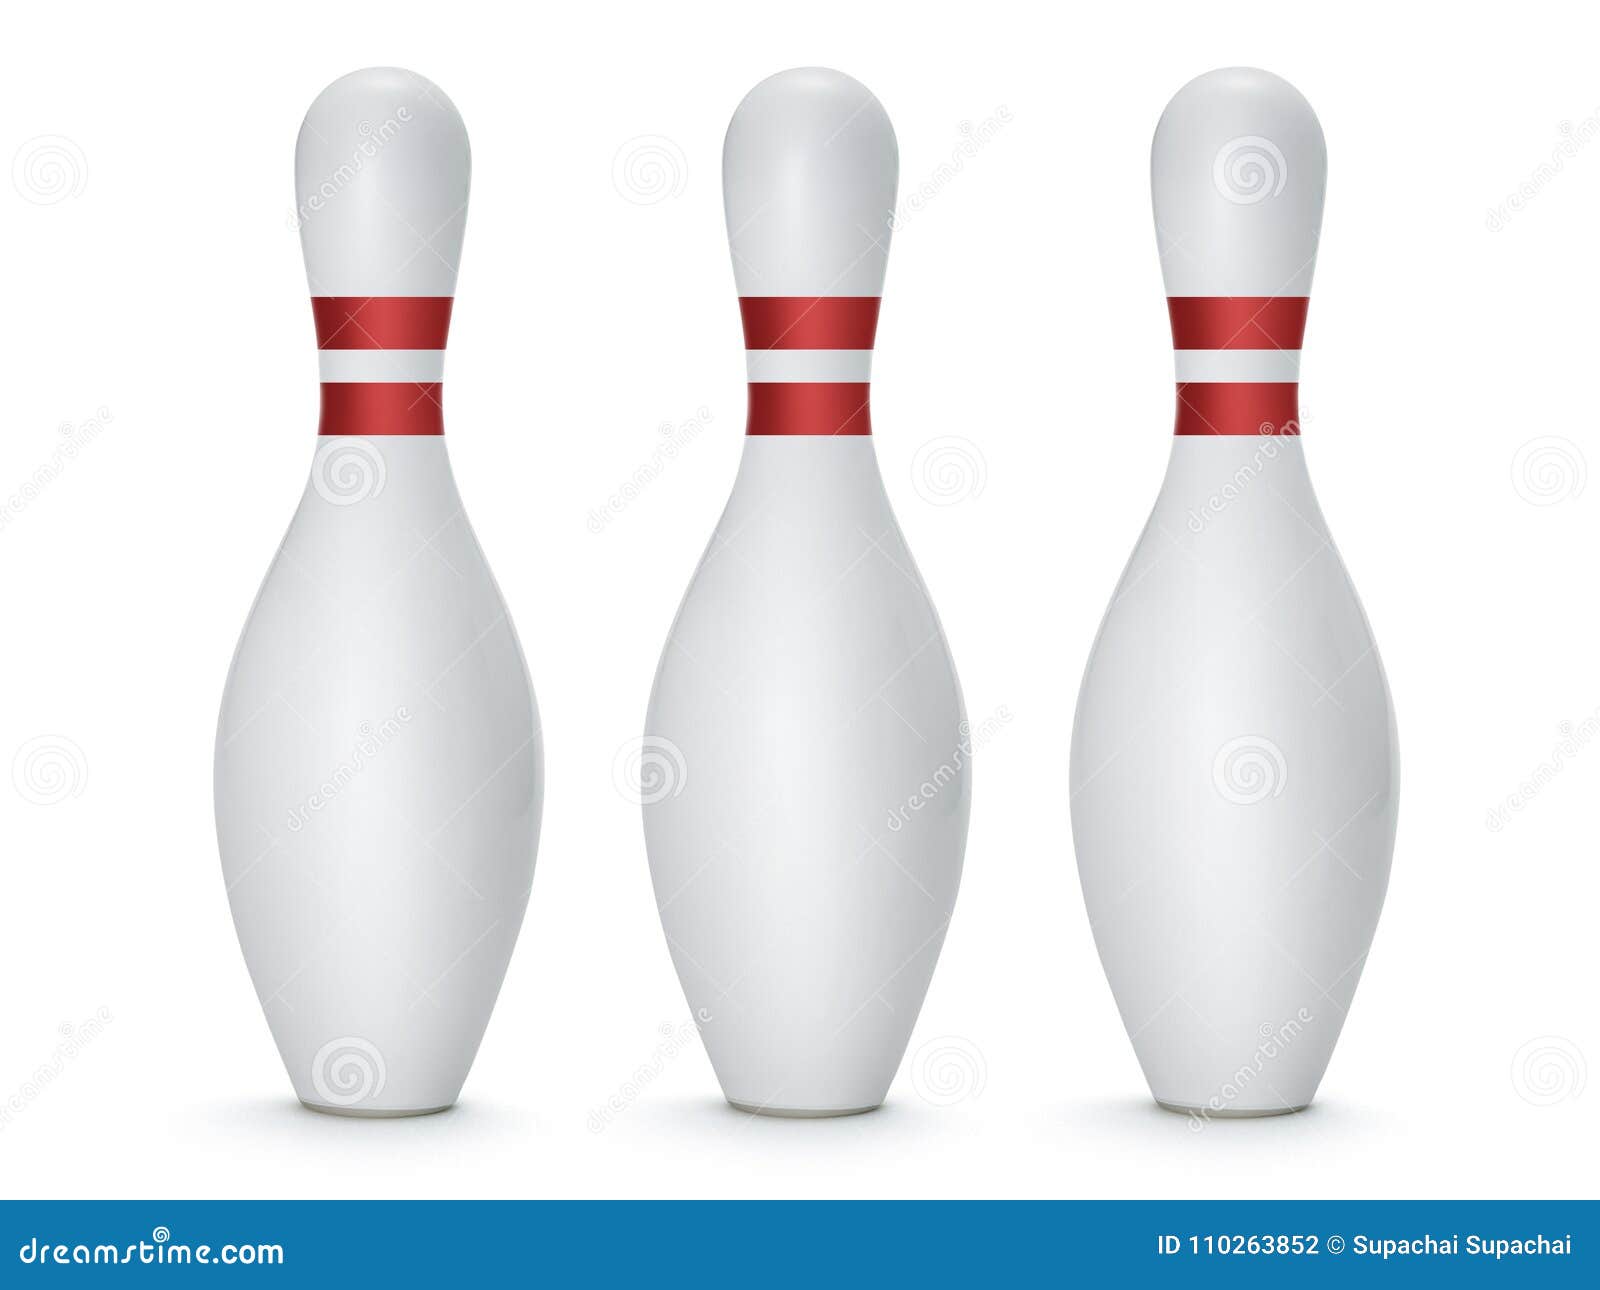 Group Of Bowling Pins On White Background Stock Illustration